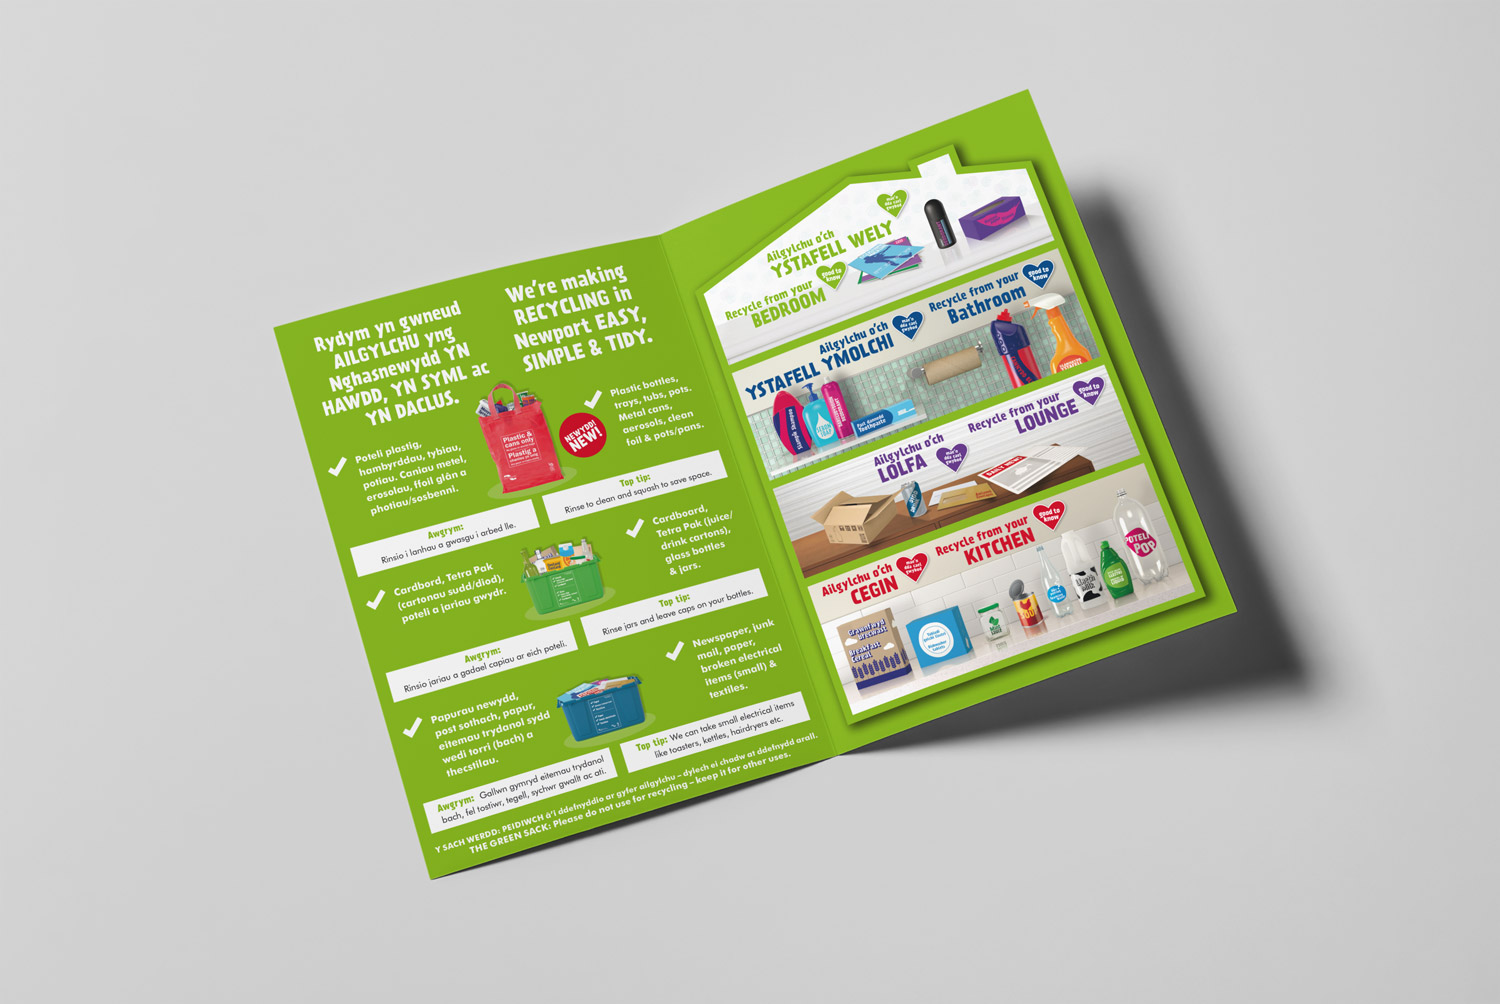 recycling-leaflet-inside-spread-get-it-sorted-recycle-now-branding.jpg